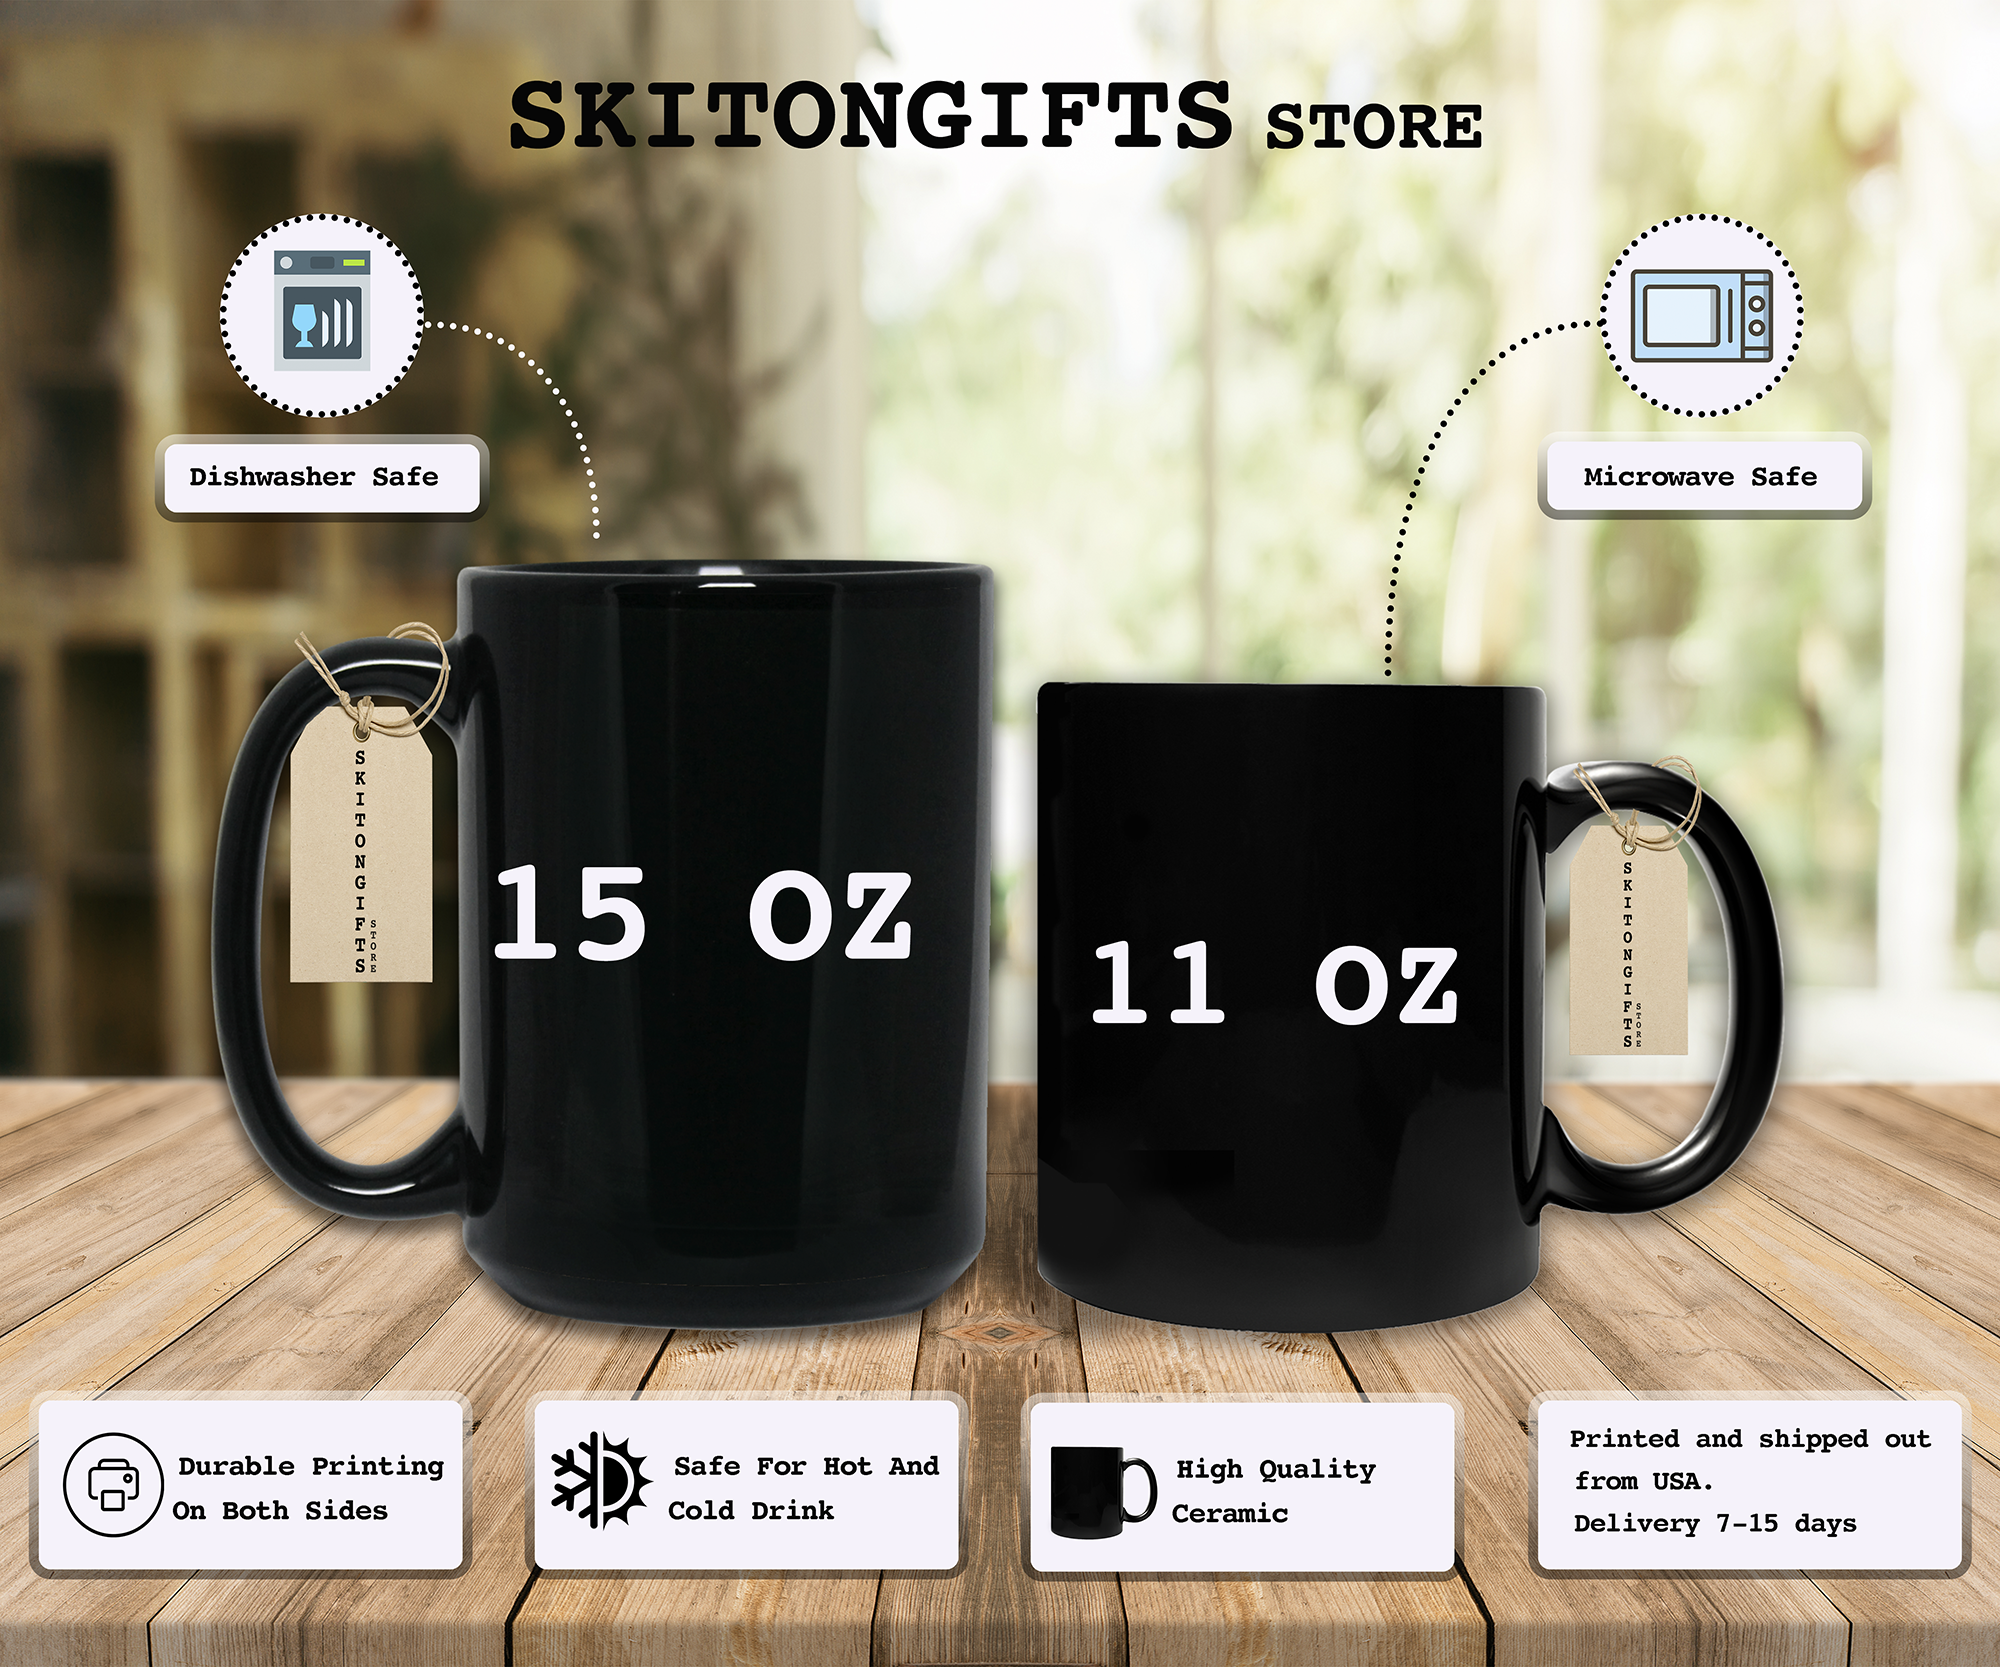 Skitongifts Funny Ceramic Novelty Coffee Mug After Custom Years You're Still The Best Step Brother Keep That Shit Up OtvFqIL